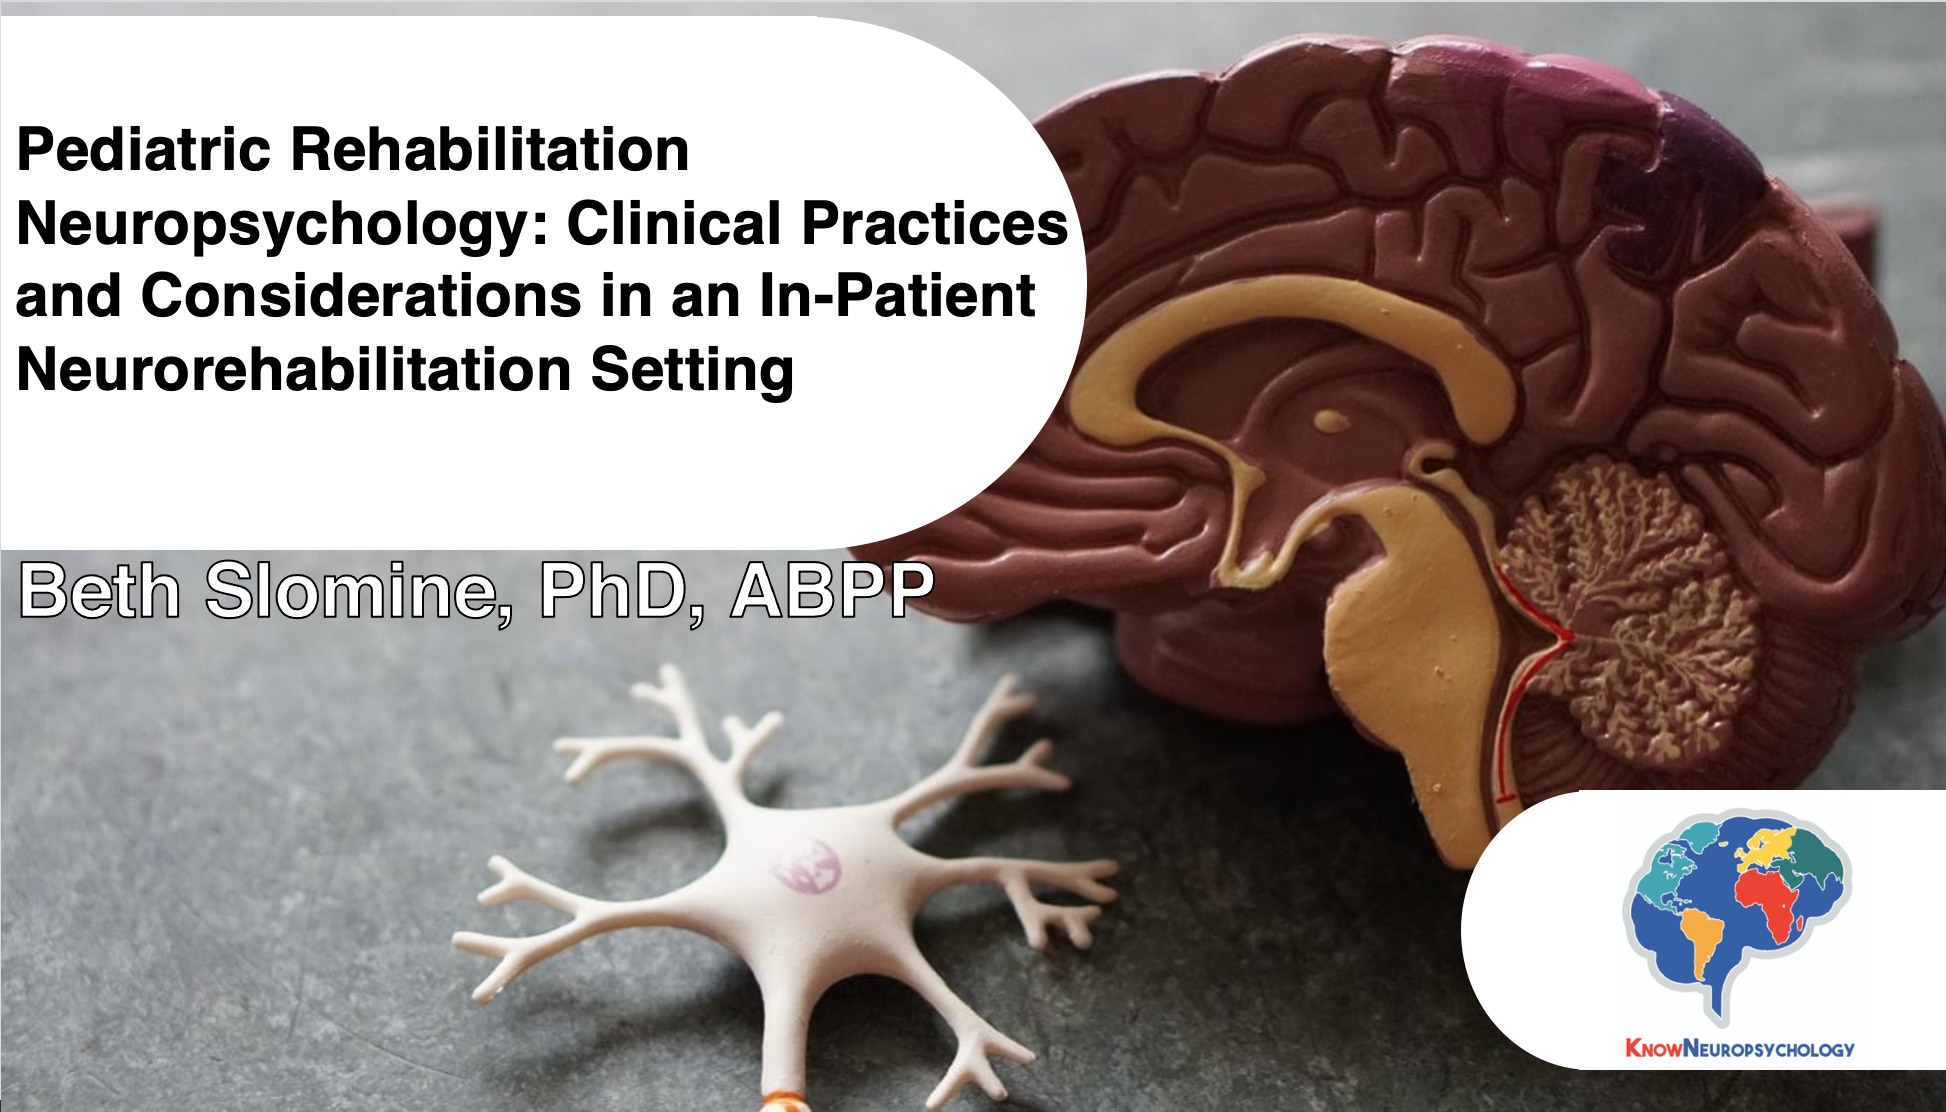 Pediatric Rehabilitation Neuropsychology: Clinical Practices and Considerations in an Inpatient Neurorehabilitation Setting with Dr. Beth Slomine on October 3, 2022 at 1pm ET